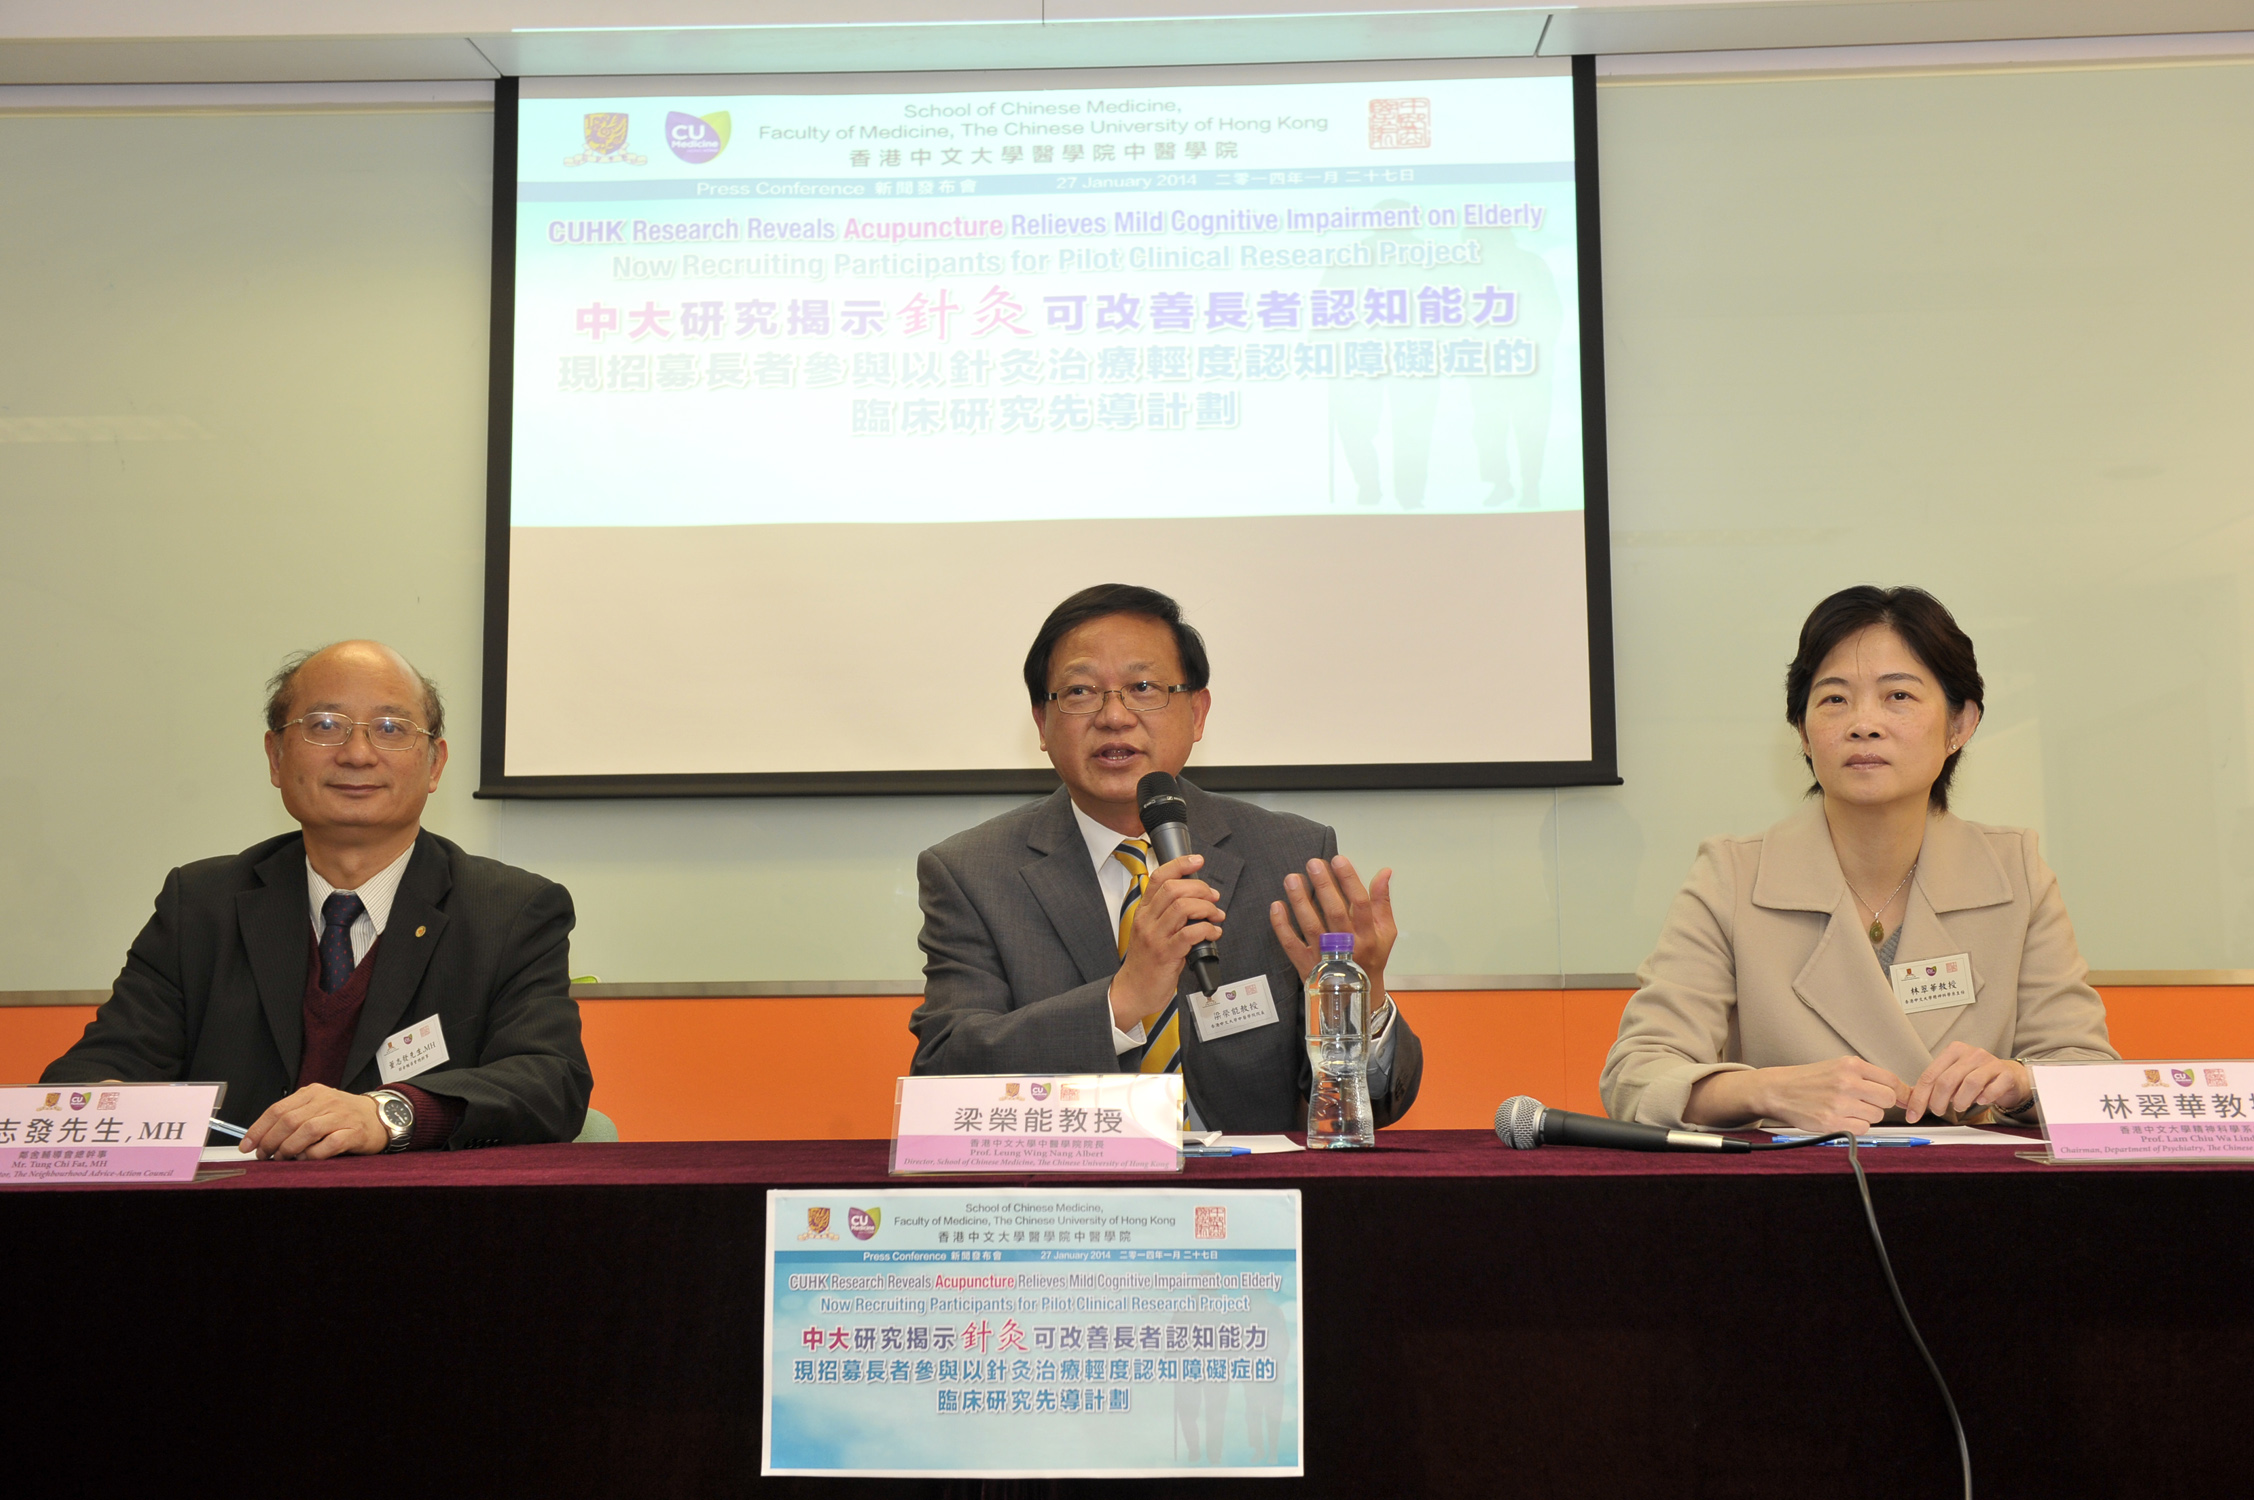 Prof. Albert Leung (middle), Director, School of Chinese Medicine, CUHK; Prof. Linda Lam (right), Chairman, Department of Psychiatry, CUHK and Mr. Tung Chi Fat, MH (left), Executive Director, the Neighbourhood Advice-Action Council introduce the clinical research on the efficacy of acupuncture in the treatment of mild cognitive impairment.